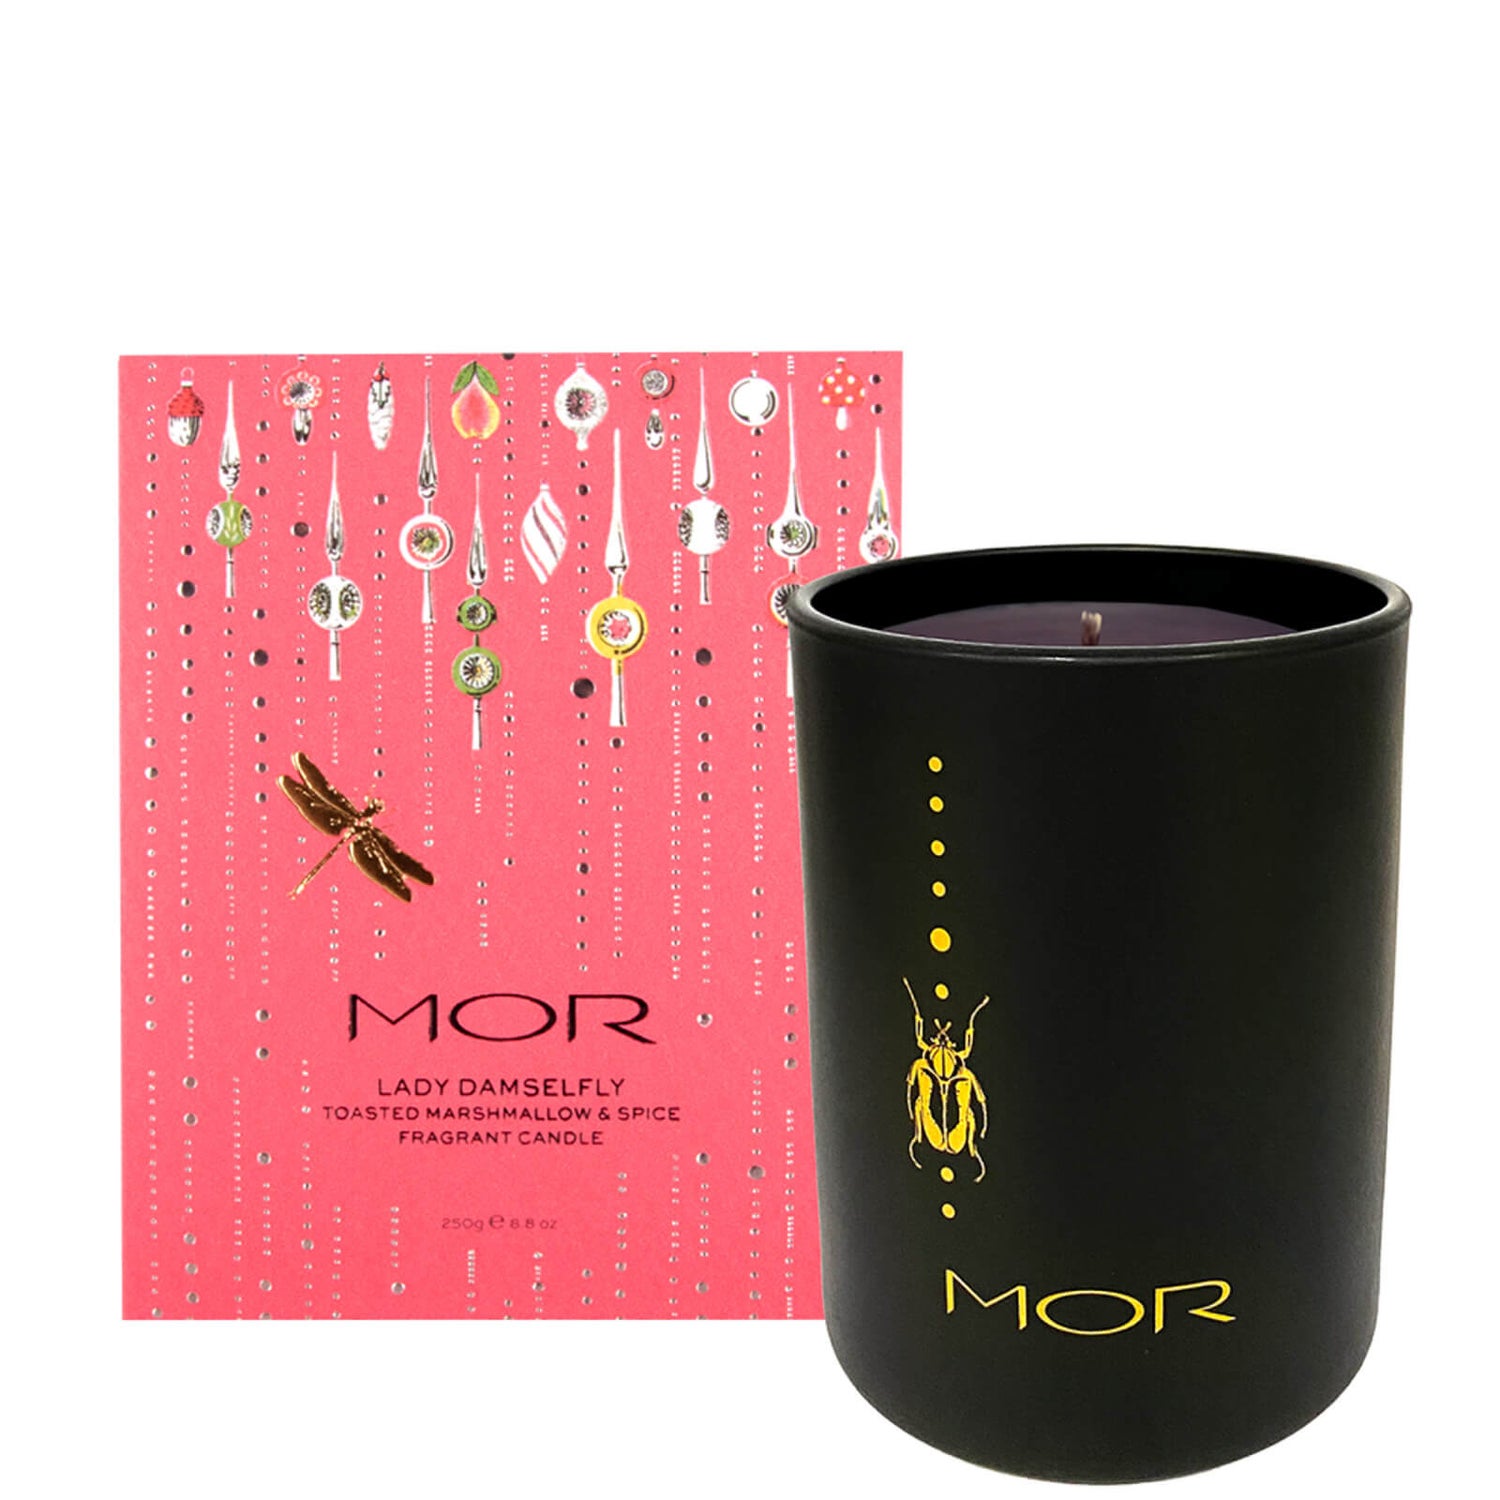 MOR Lady Damselfly Fragrant Candle Toasted Marshmallow and Spice 250g